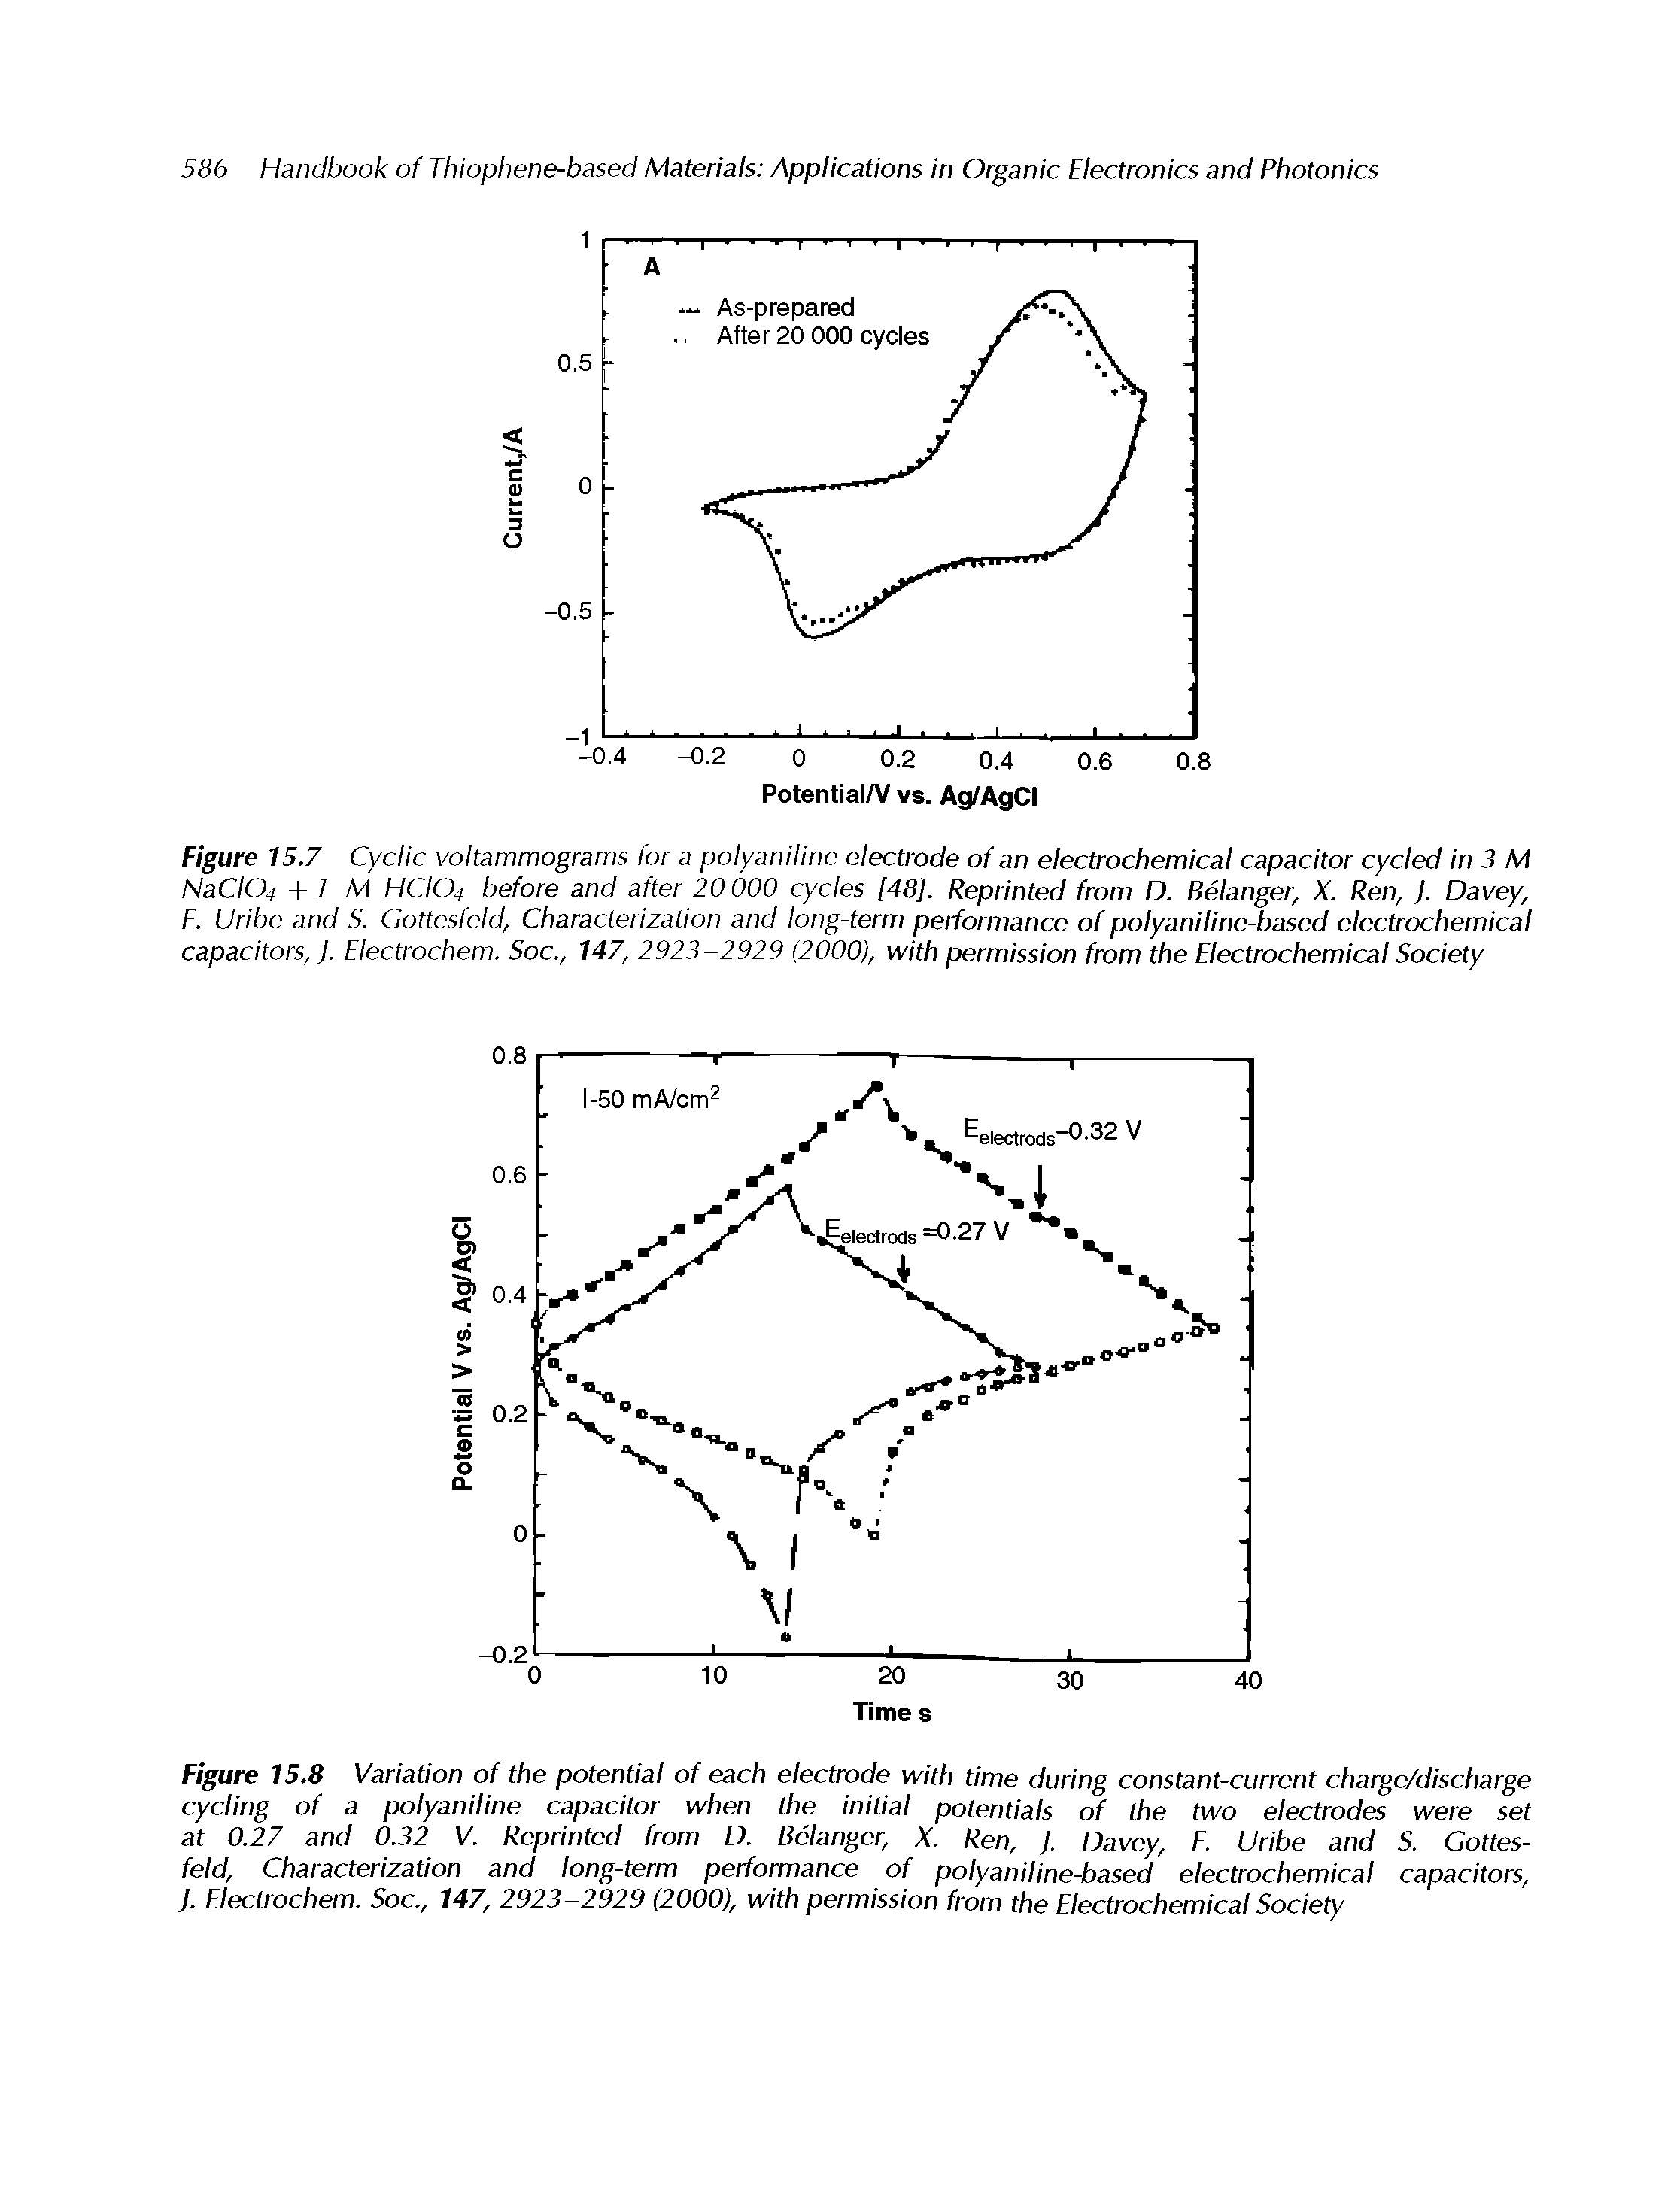 Figure 15.7 Cyclic voltammograms for a polyaniline electrode of an electrochemical capacitor cycled in 3 M NaCI04 -E 1 M HCIO4 before and after 20 000 cycles 148]. Reprinted from D. Belanger, X. Ren, J. Davey, F. Uribe and S. Cottesfeld, Characterization and long-term performance of polyaniline-based electrochemical capacitors, J. Electrochem. Soc., 147, 2923-2929 (2000), with permission from the Electrochemical Society...